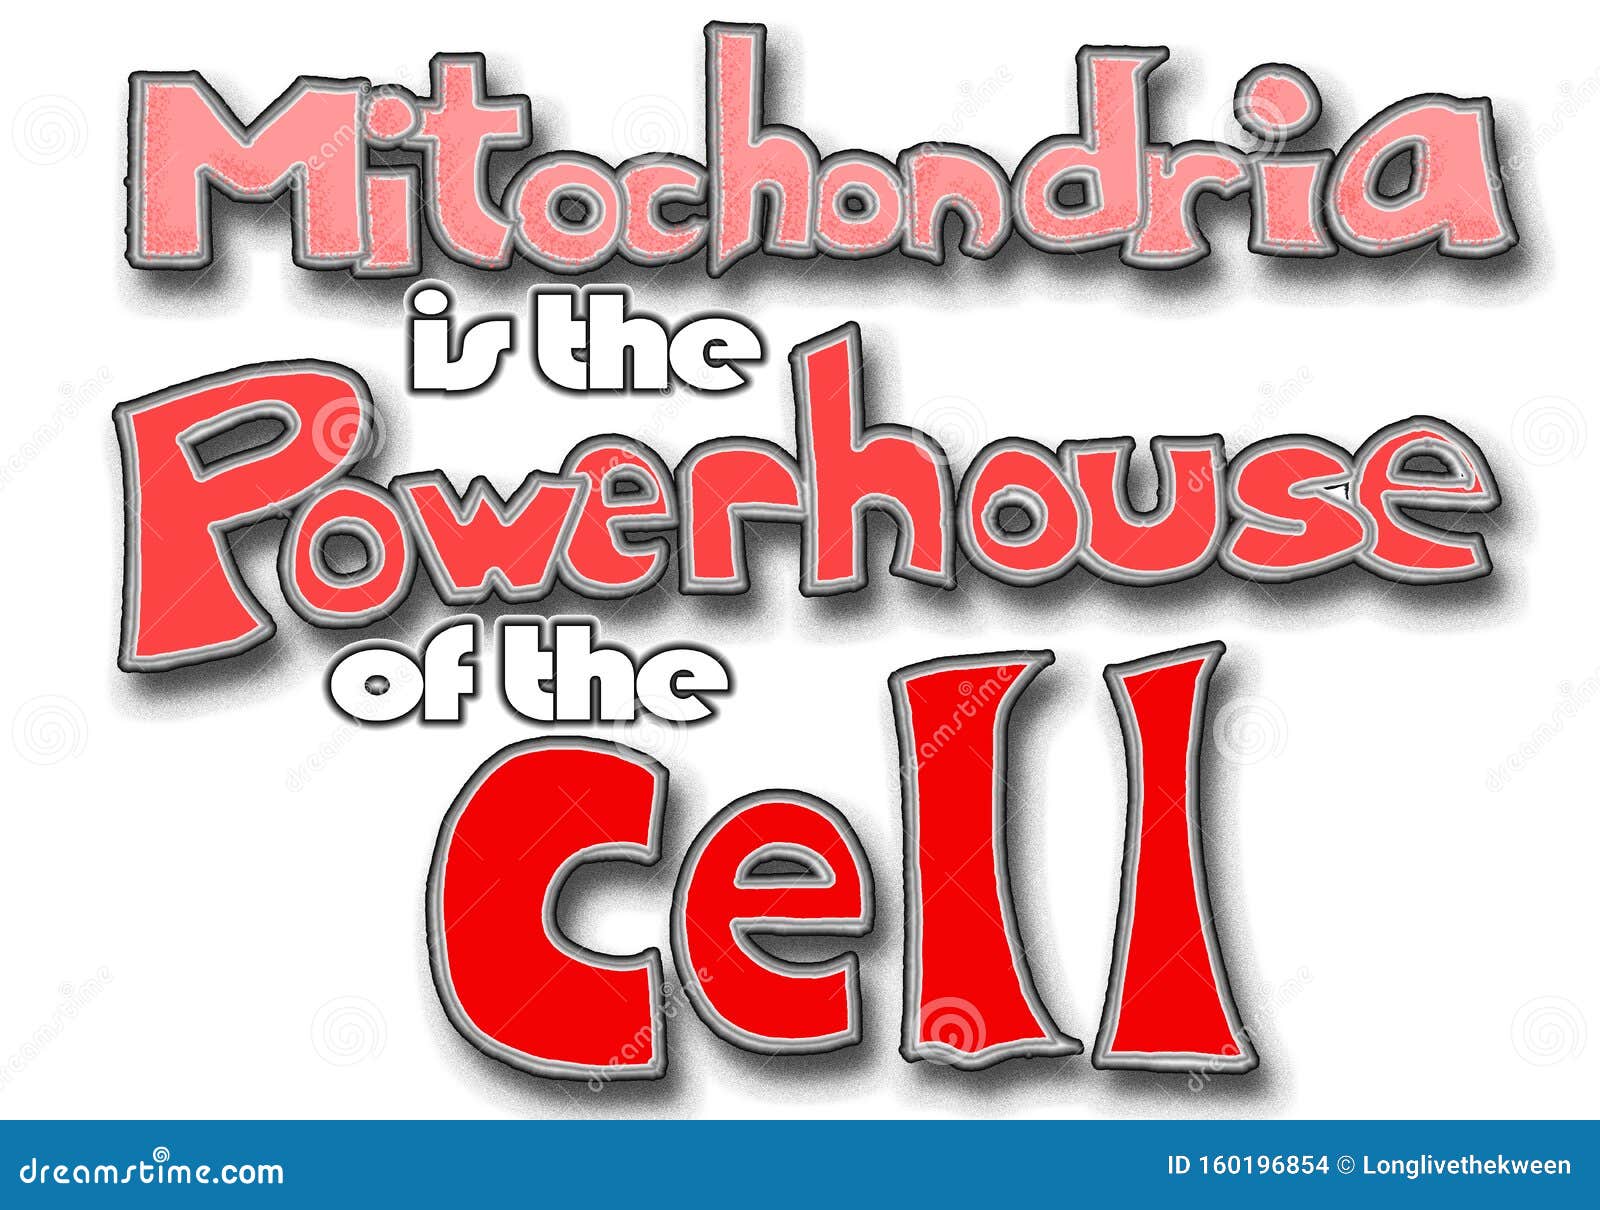 mitochondria is the power house of the cell